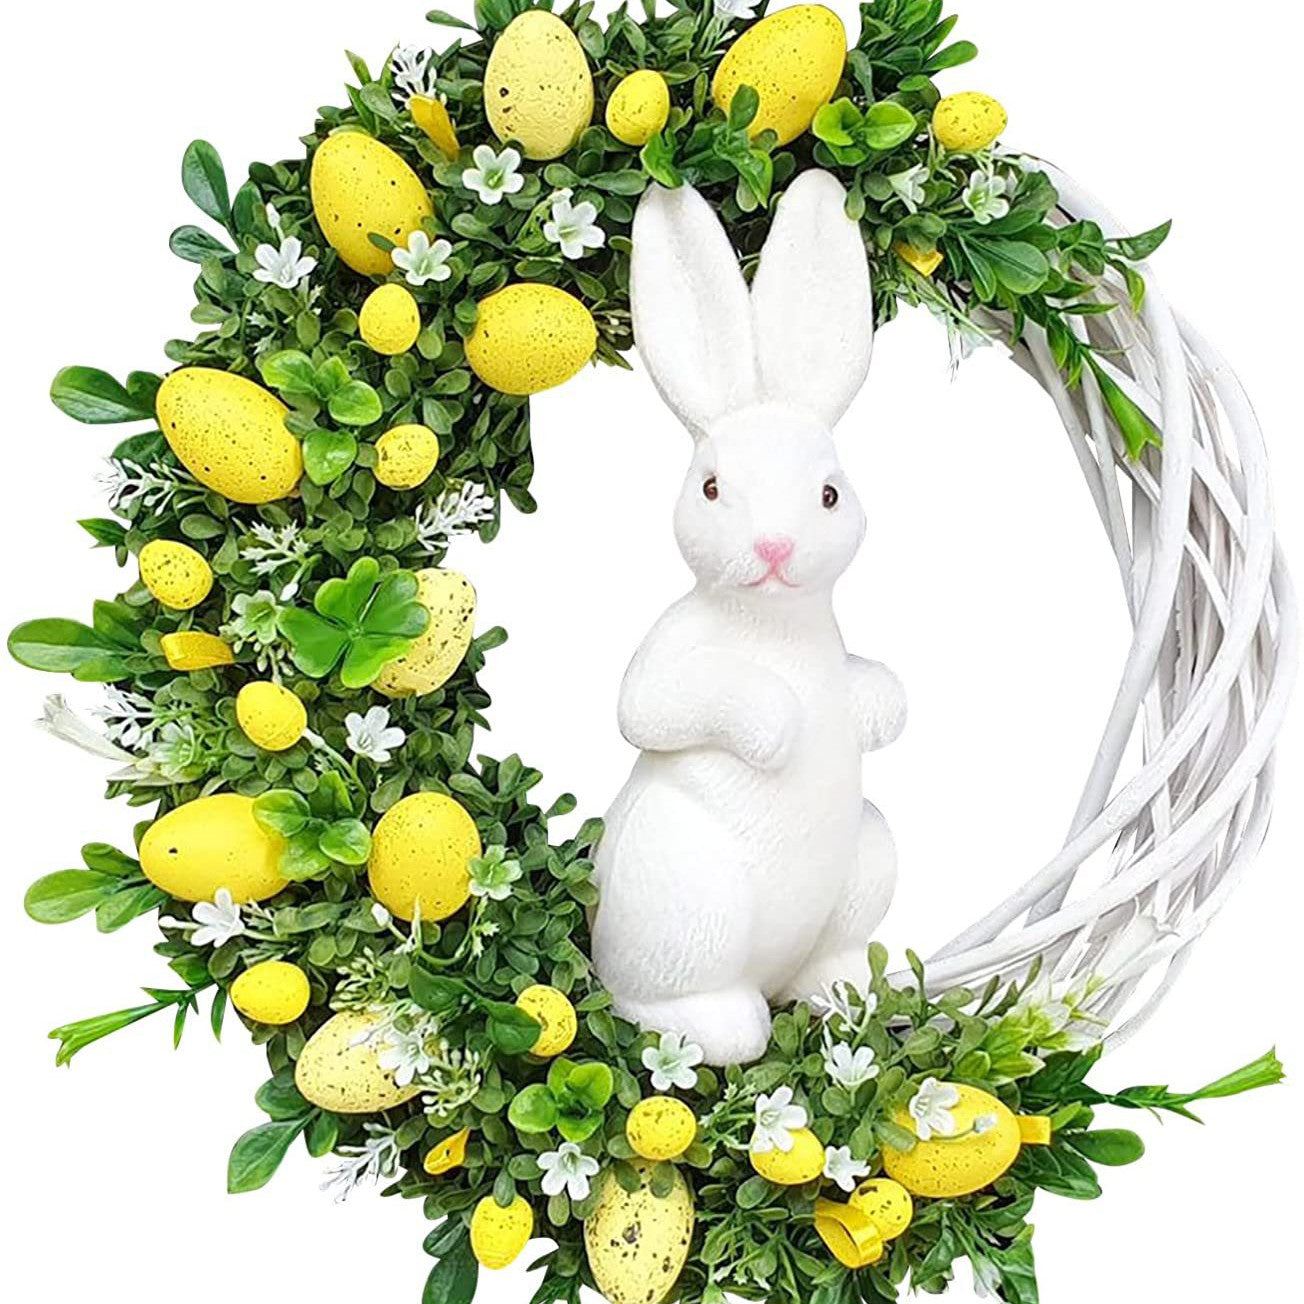 Easter decorations, Easter eggs decorations, Easter bunny decorations, Easter wreaths, Easter garlands, Easter centerpieces, Easter table runners, Easter tablecloths, Easter baskets decorations, Easter grass decorations, Easter candy decorations, Easter lights, Easter inflatables, Easter door wreaths, Easter tree decorations, Easter wall art, Easter banners, Easter window clings, Easter garden flags, Easter outdoor decorations.